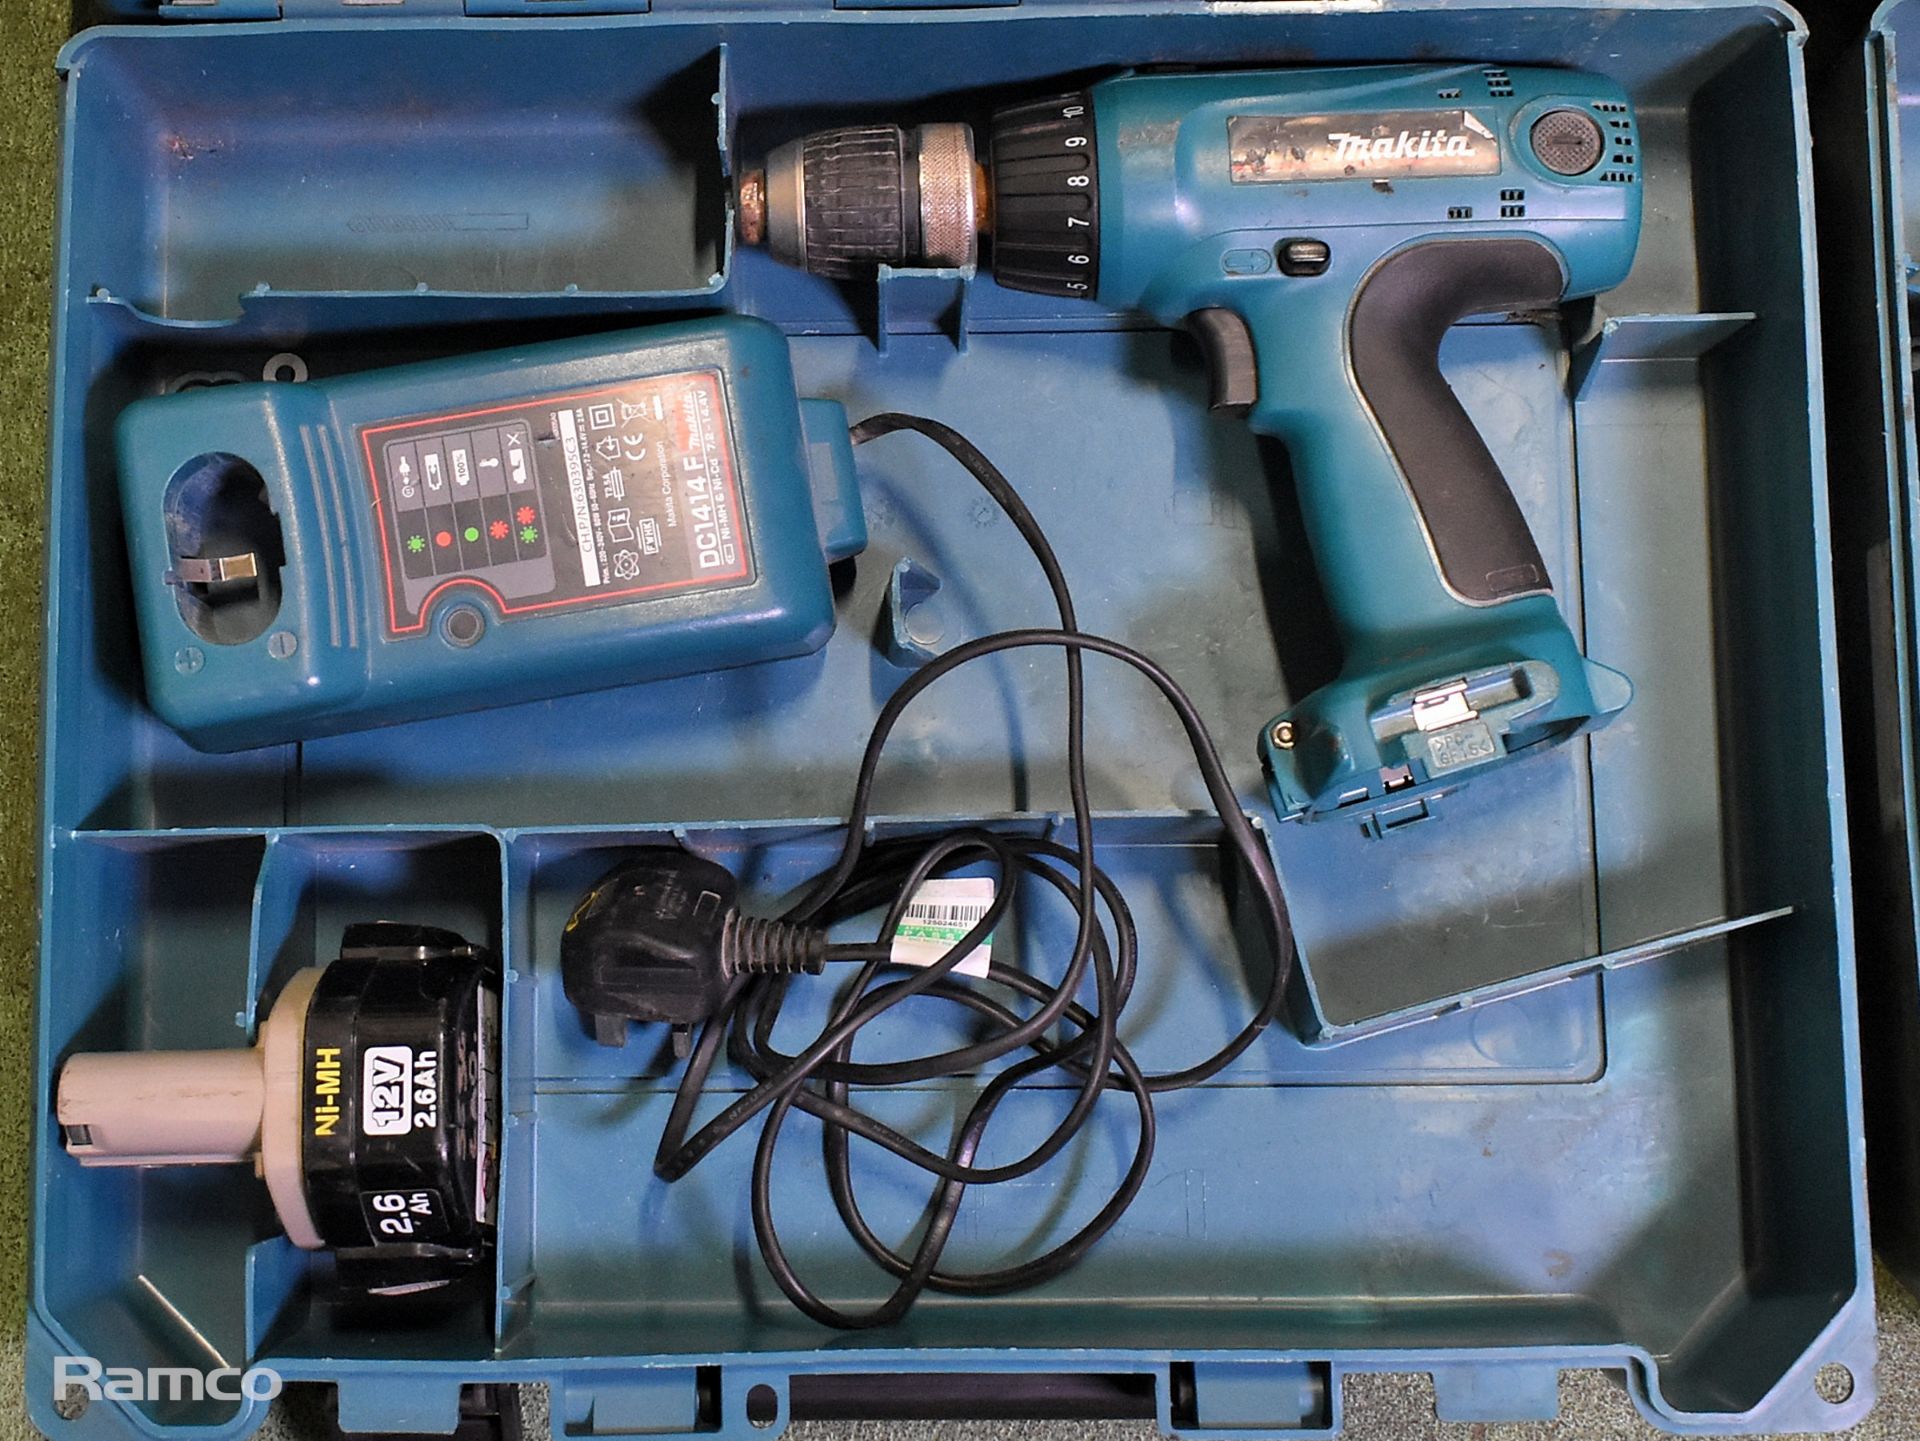 2x Makita 6317D cordless drills - DC1414F charger - 1x 12V battery - case - Image 2 of 8